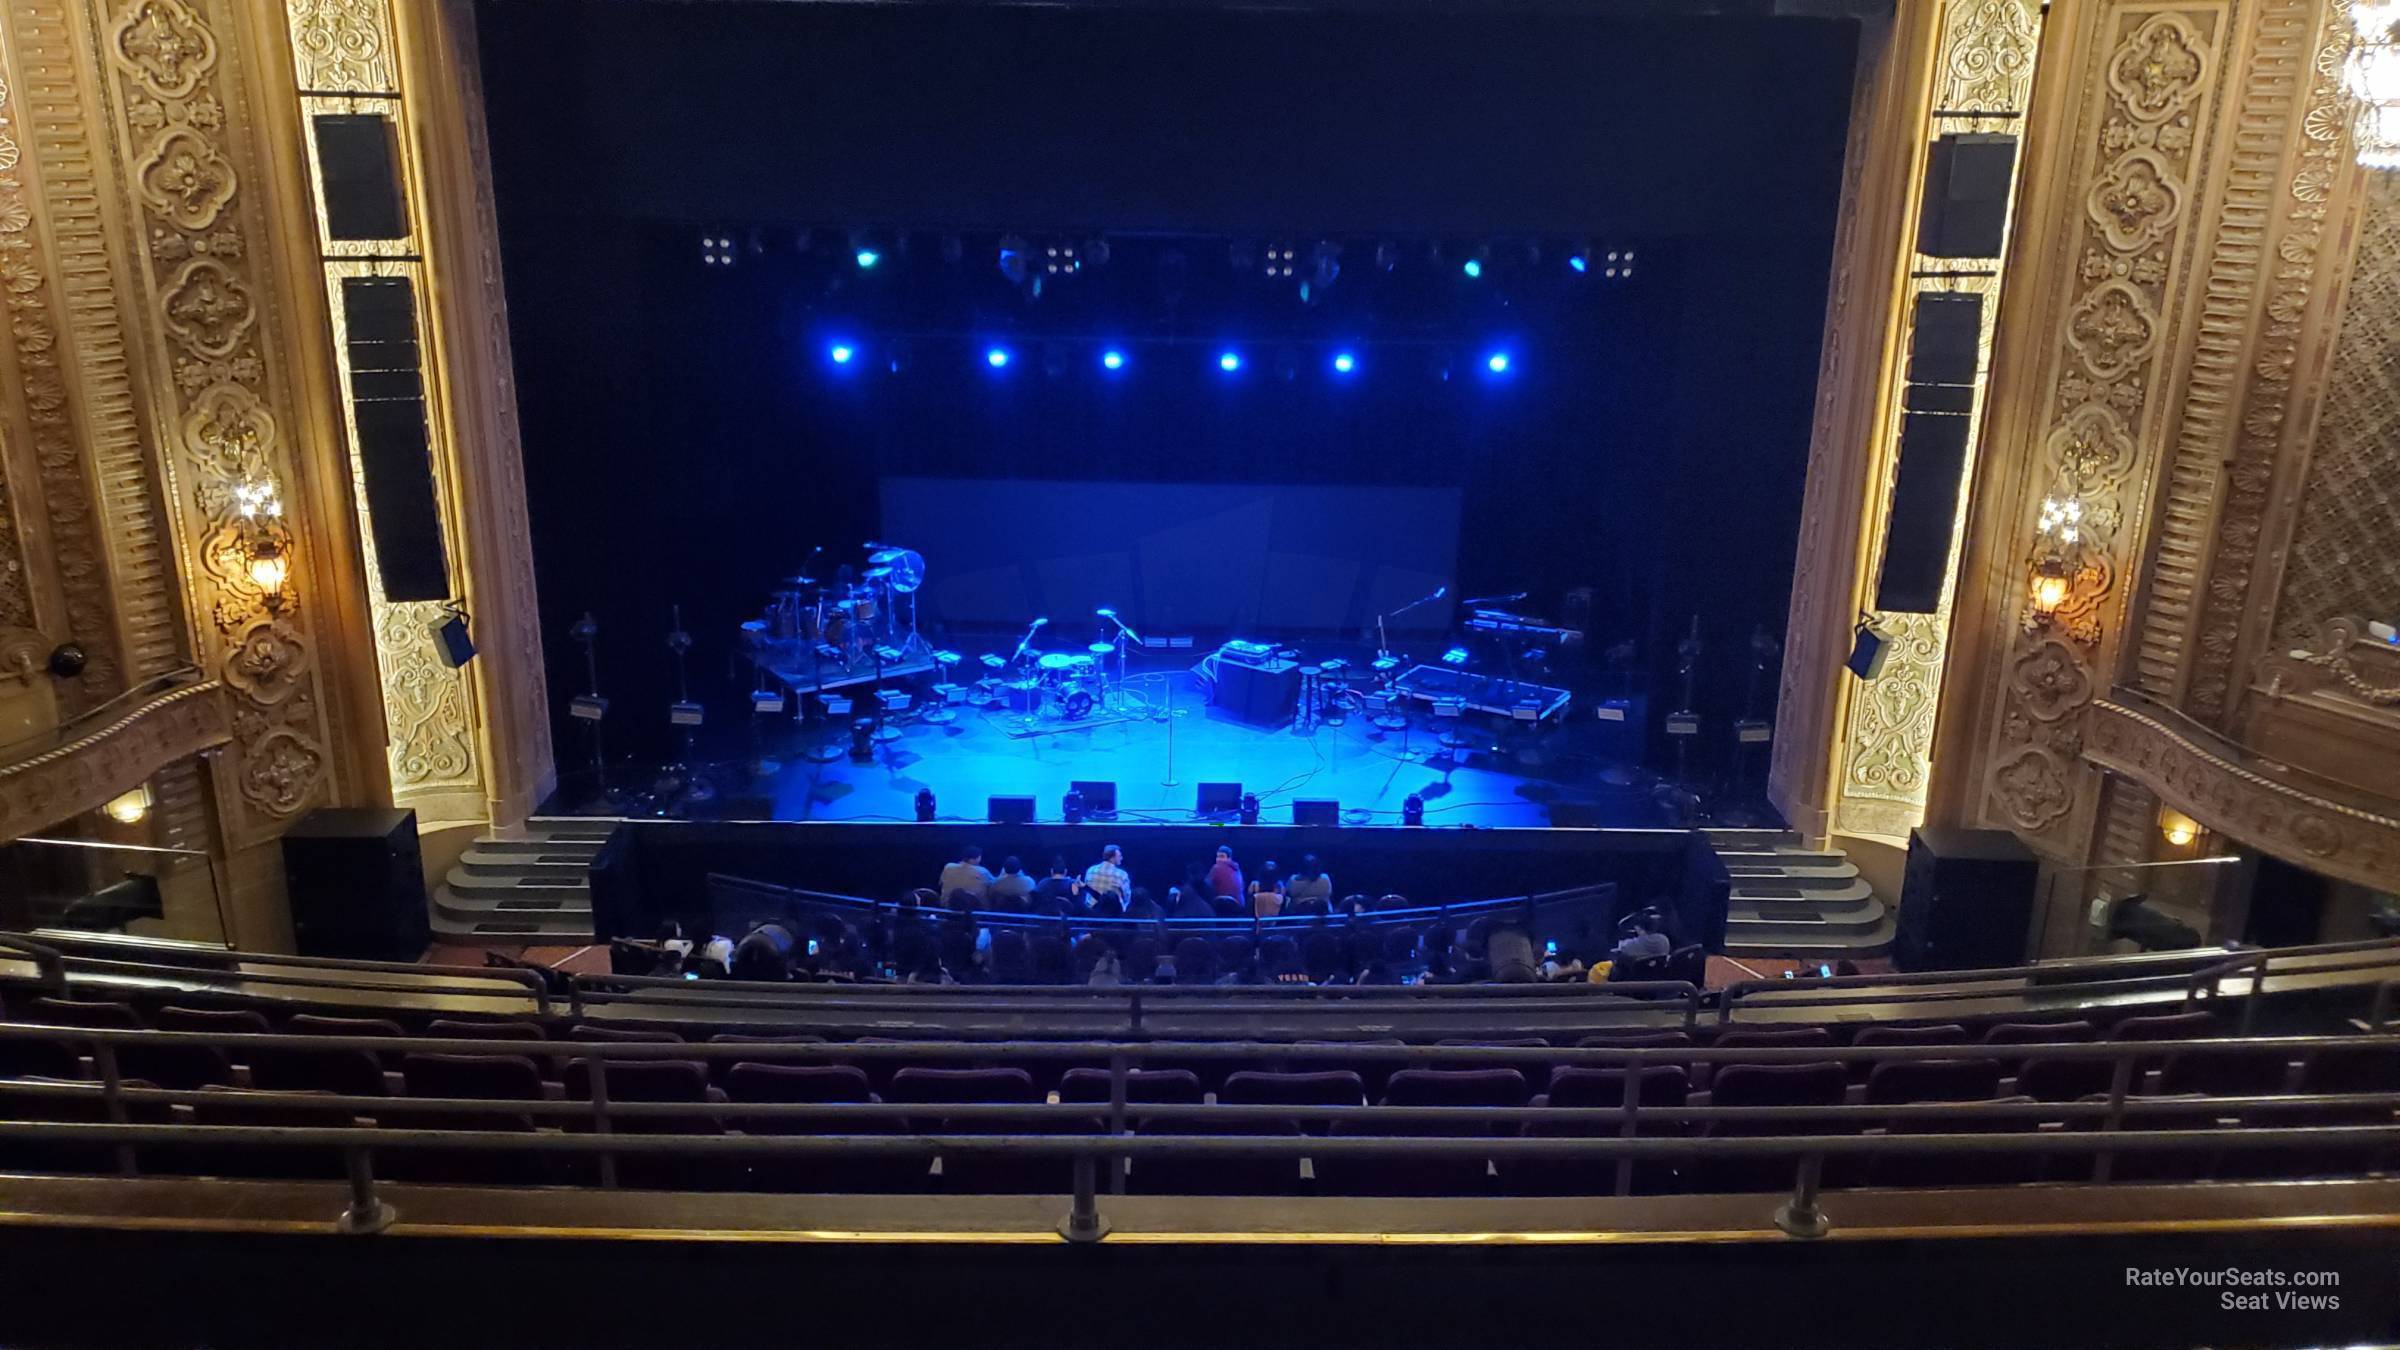 section 13, row e seat view  - paramount theatre - seattle